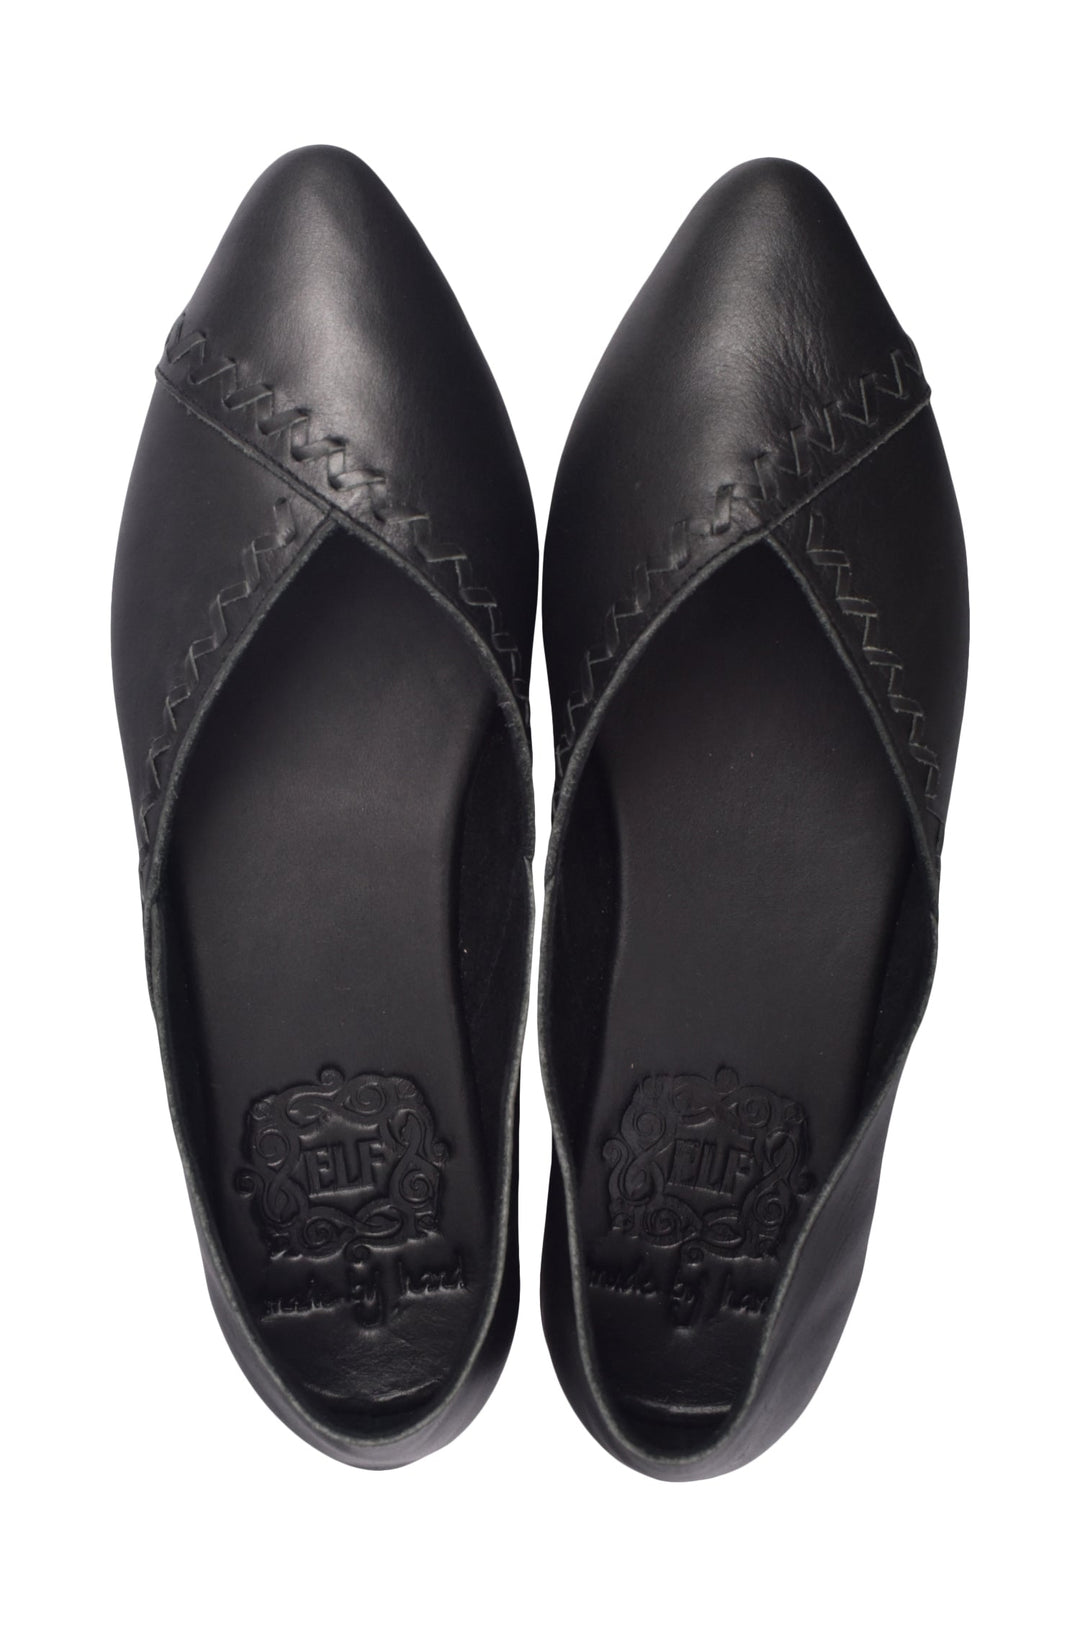 Elle Pointy Toe Leather Ballet Flats by ELF